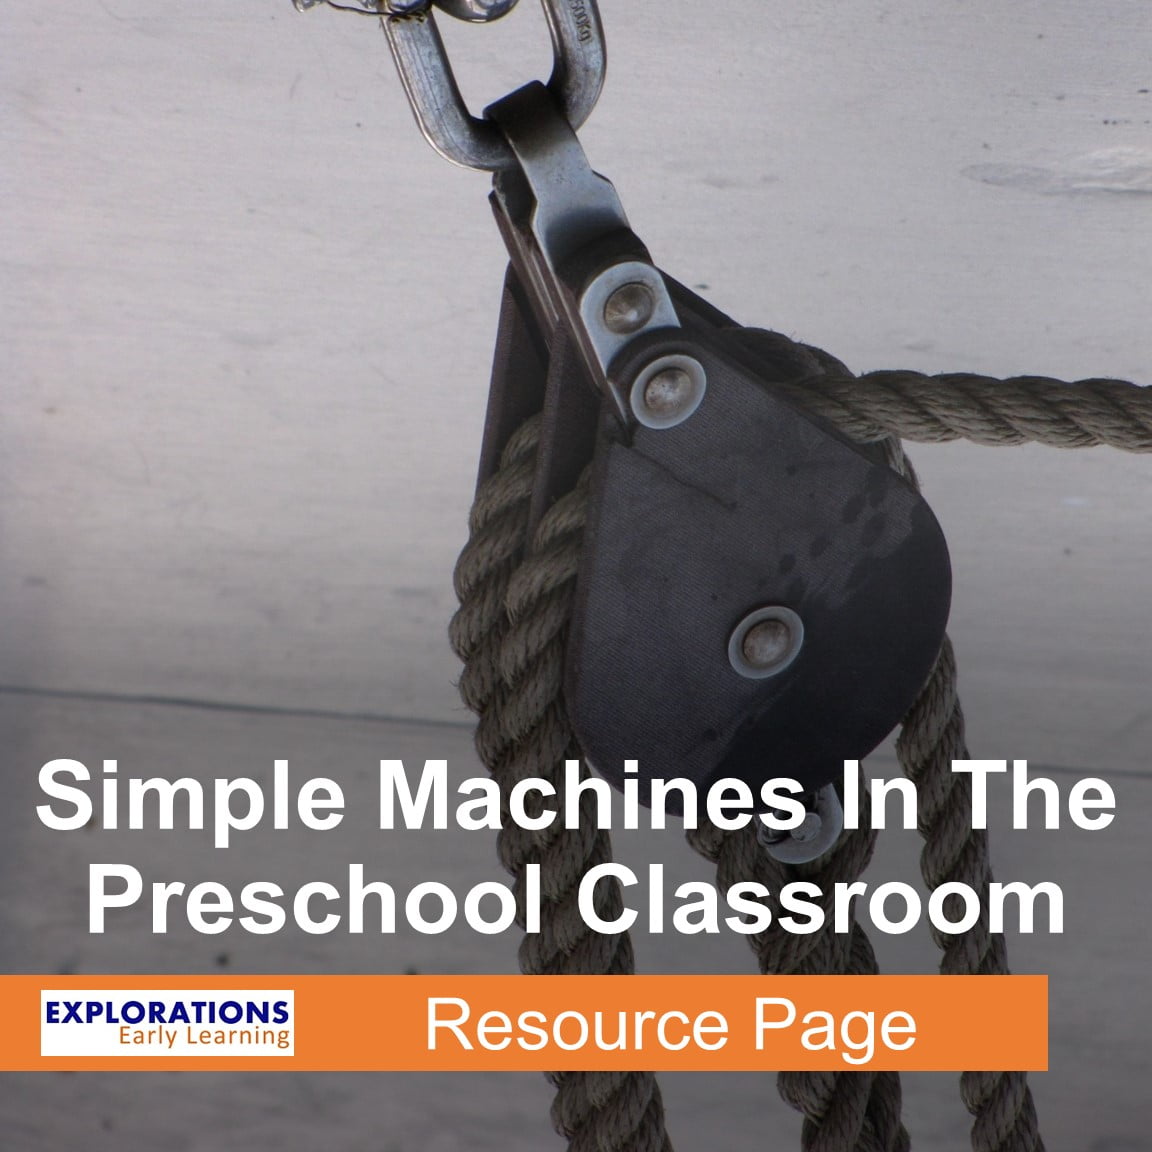 Simple Machines In The Preschool Classroom | Resource Page